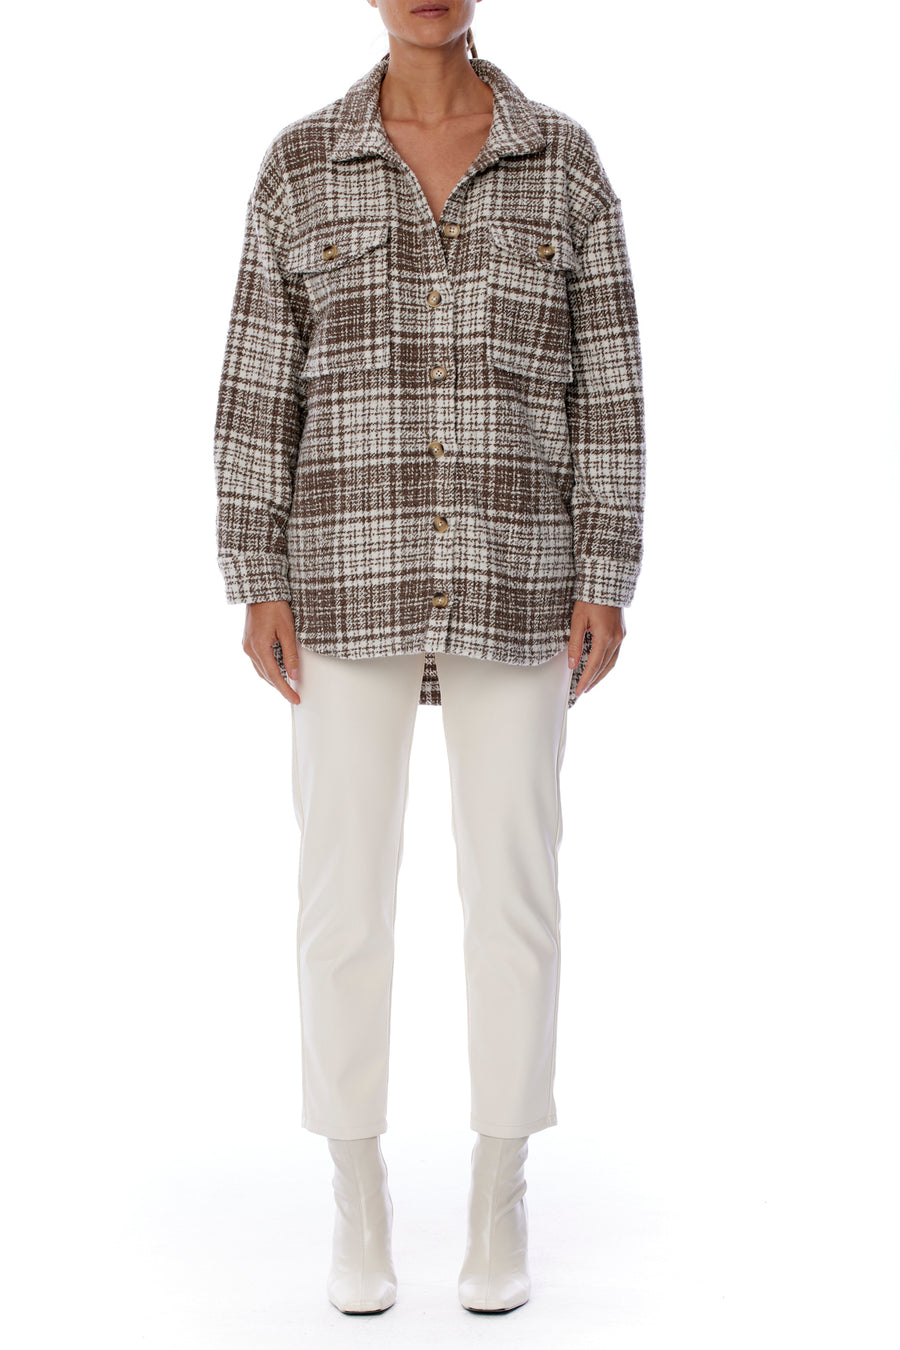 Cozy coco and white plaid button up top with shirttail hem, collar and front and side pockets